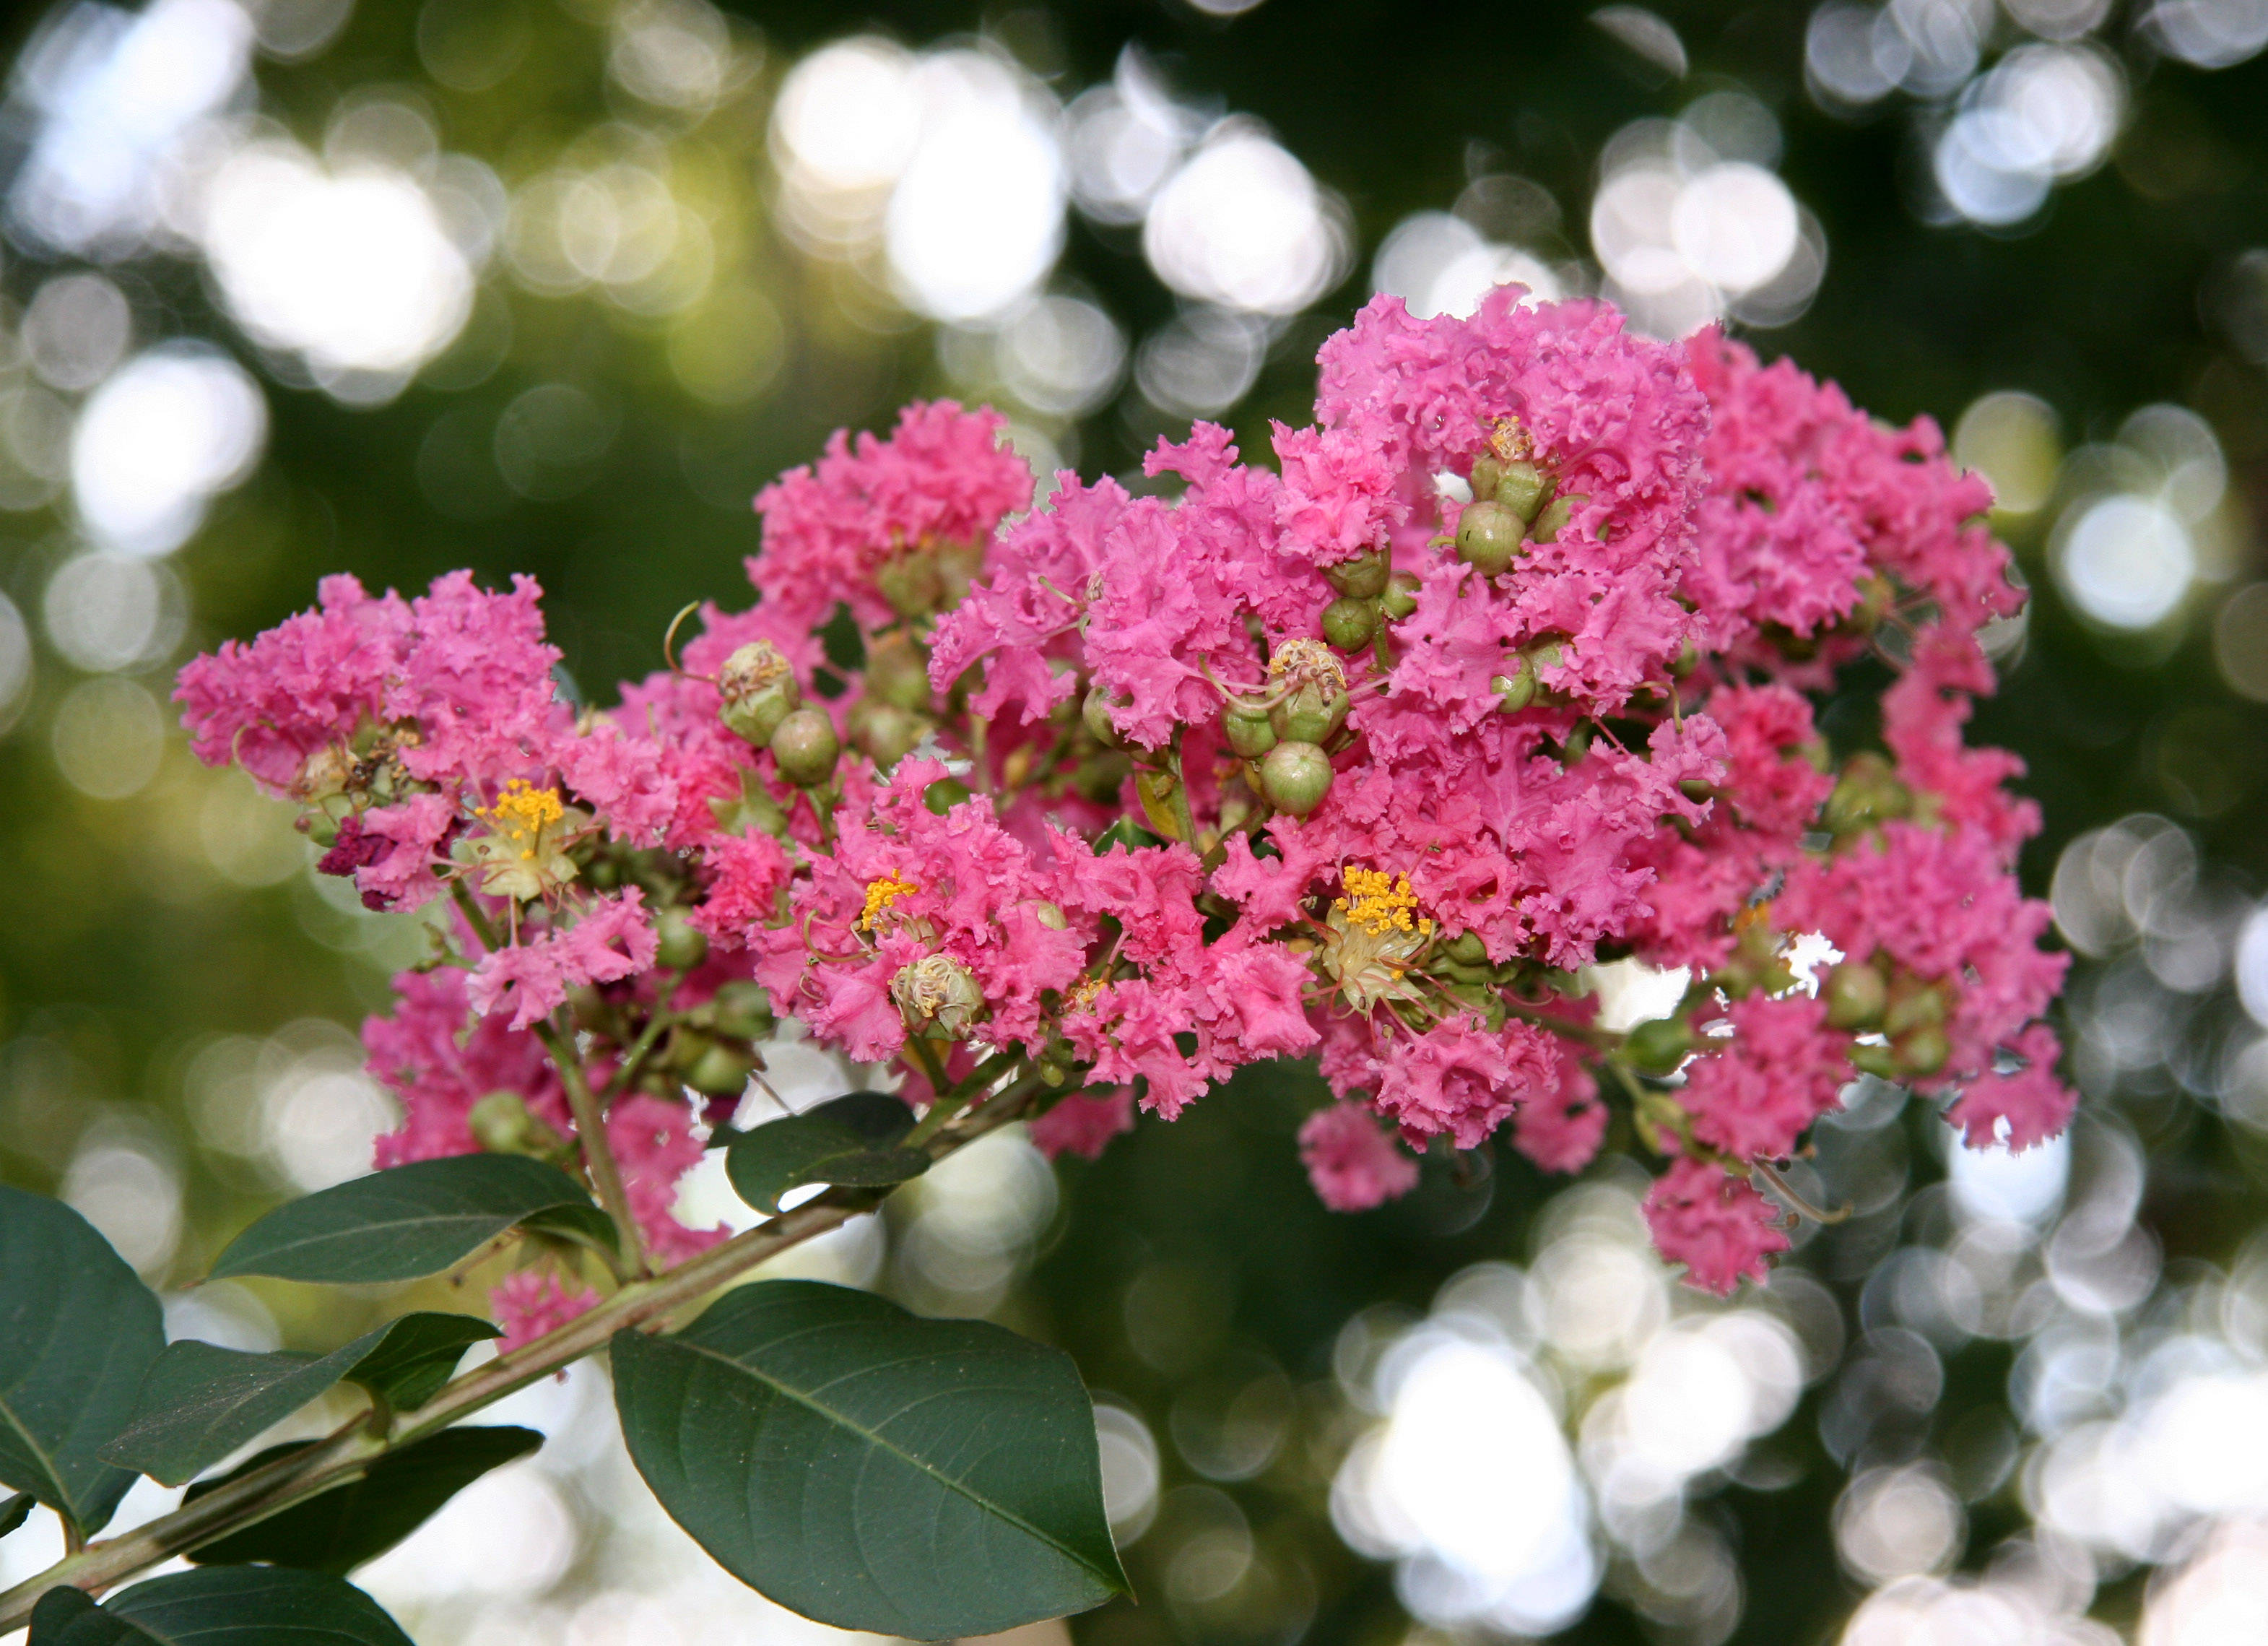 Crepe Myrtle Blossoms photo - Hubert Steed photos at pbase.com